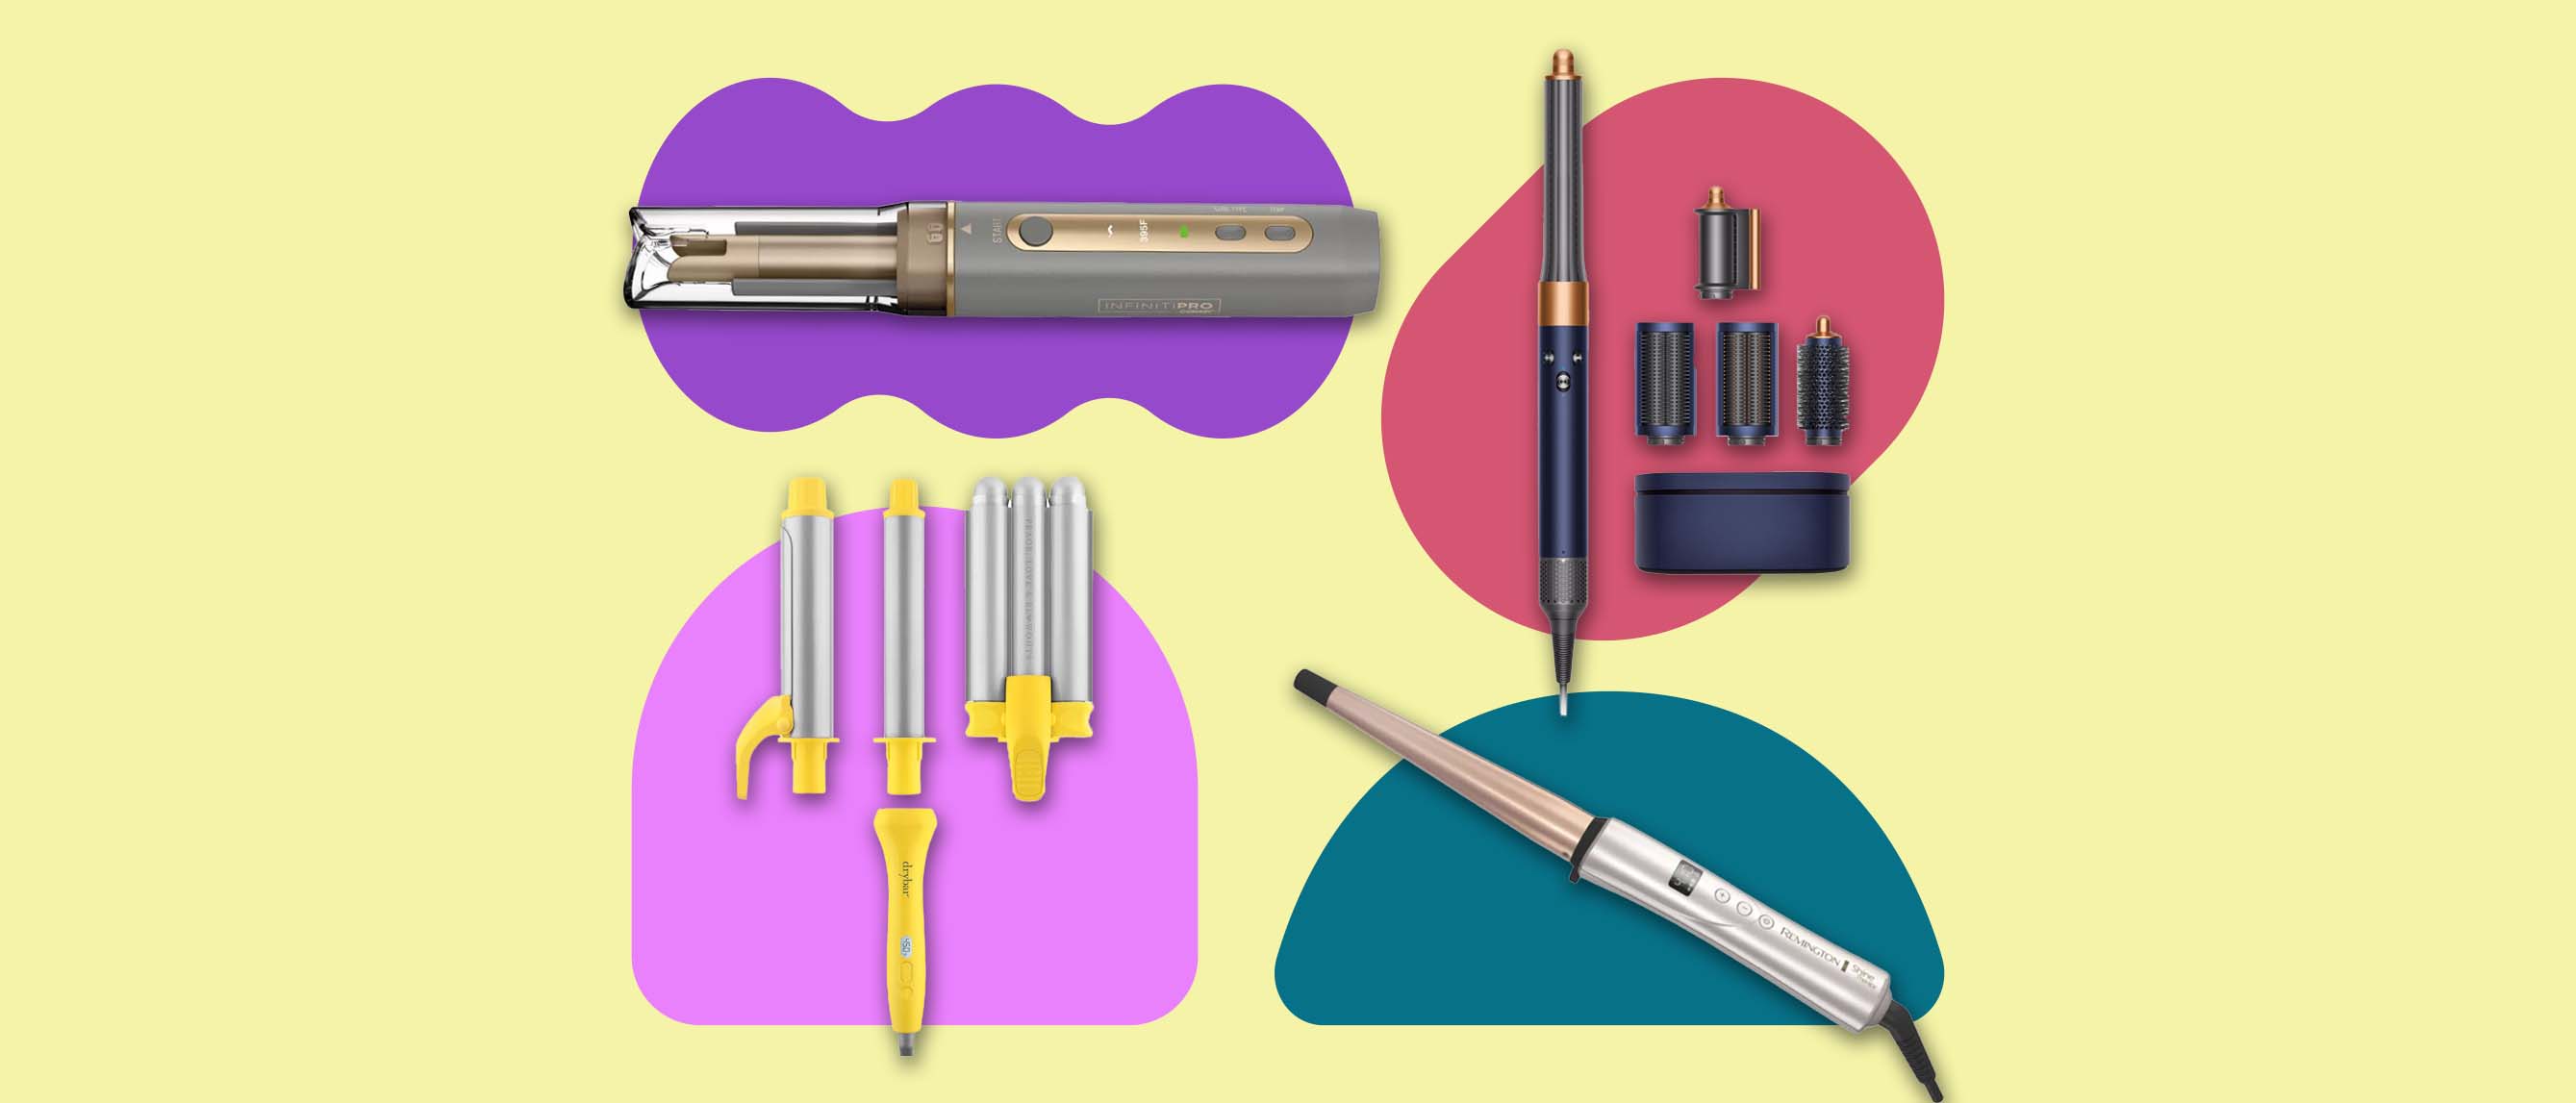 Image of four types of hair curlers including Dyson, Drybar, InfinitiPro and Remington